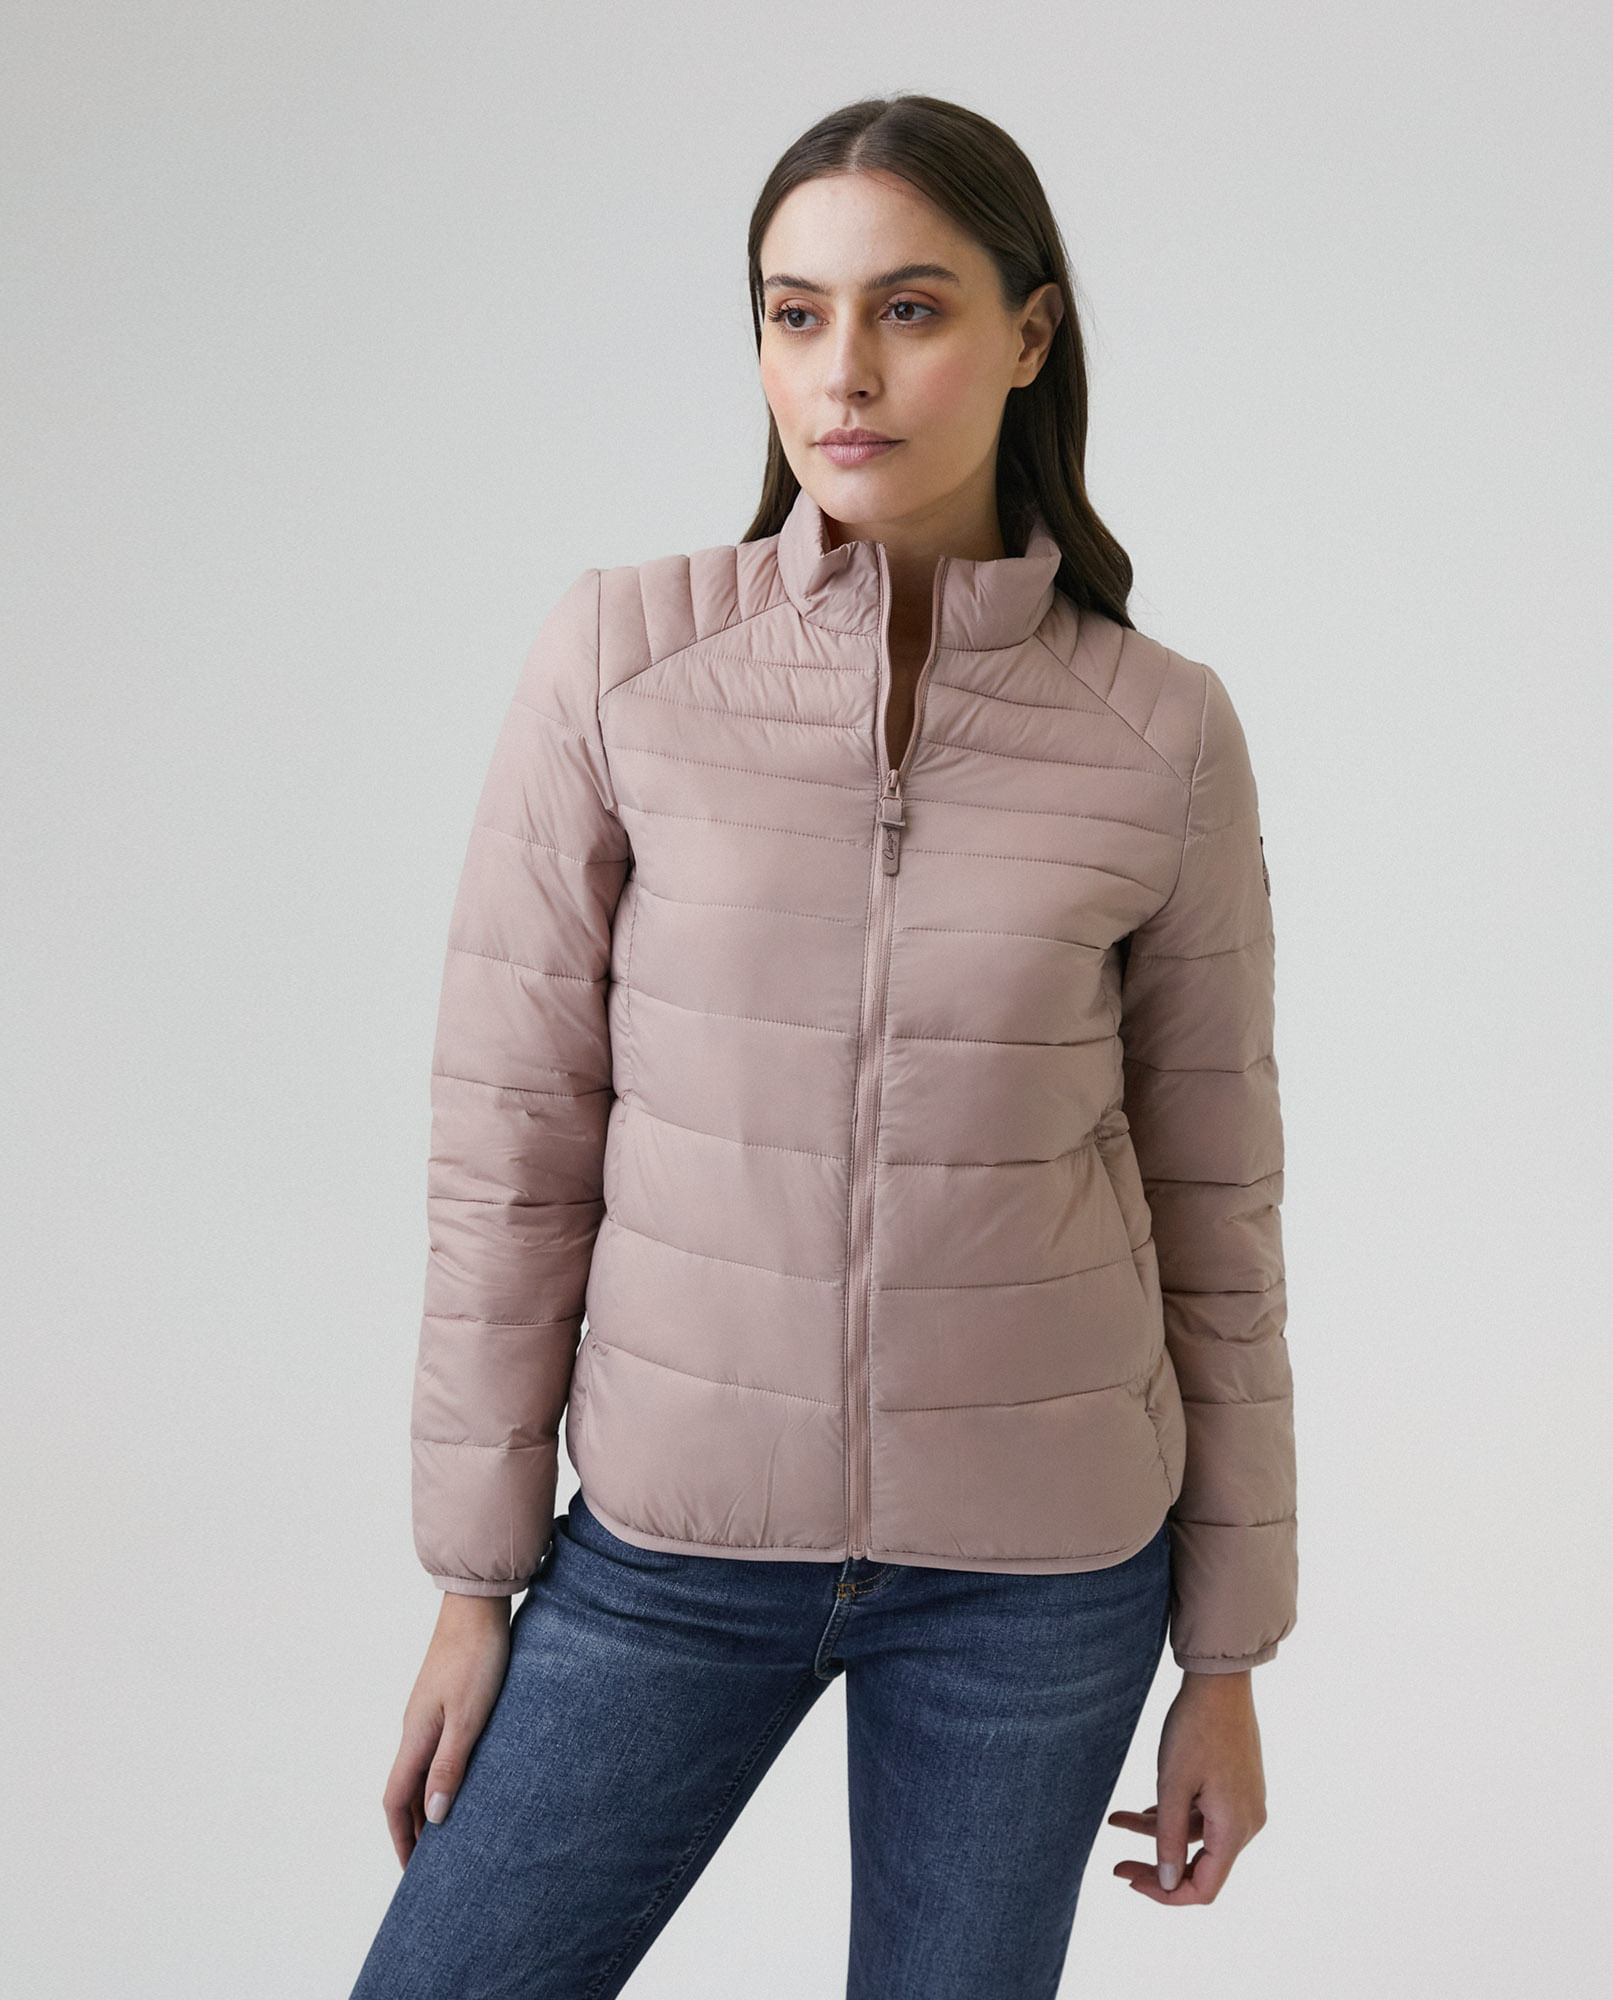 Chaqueta impermeable mujer